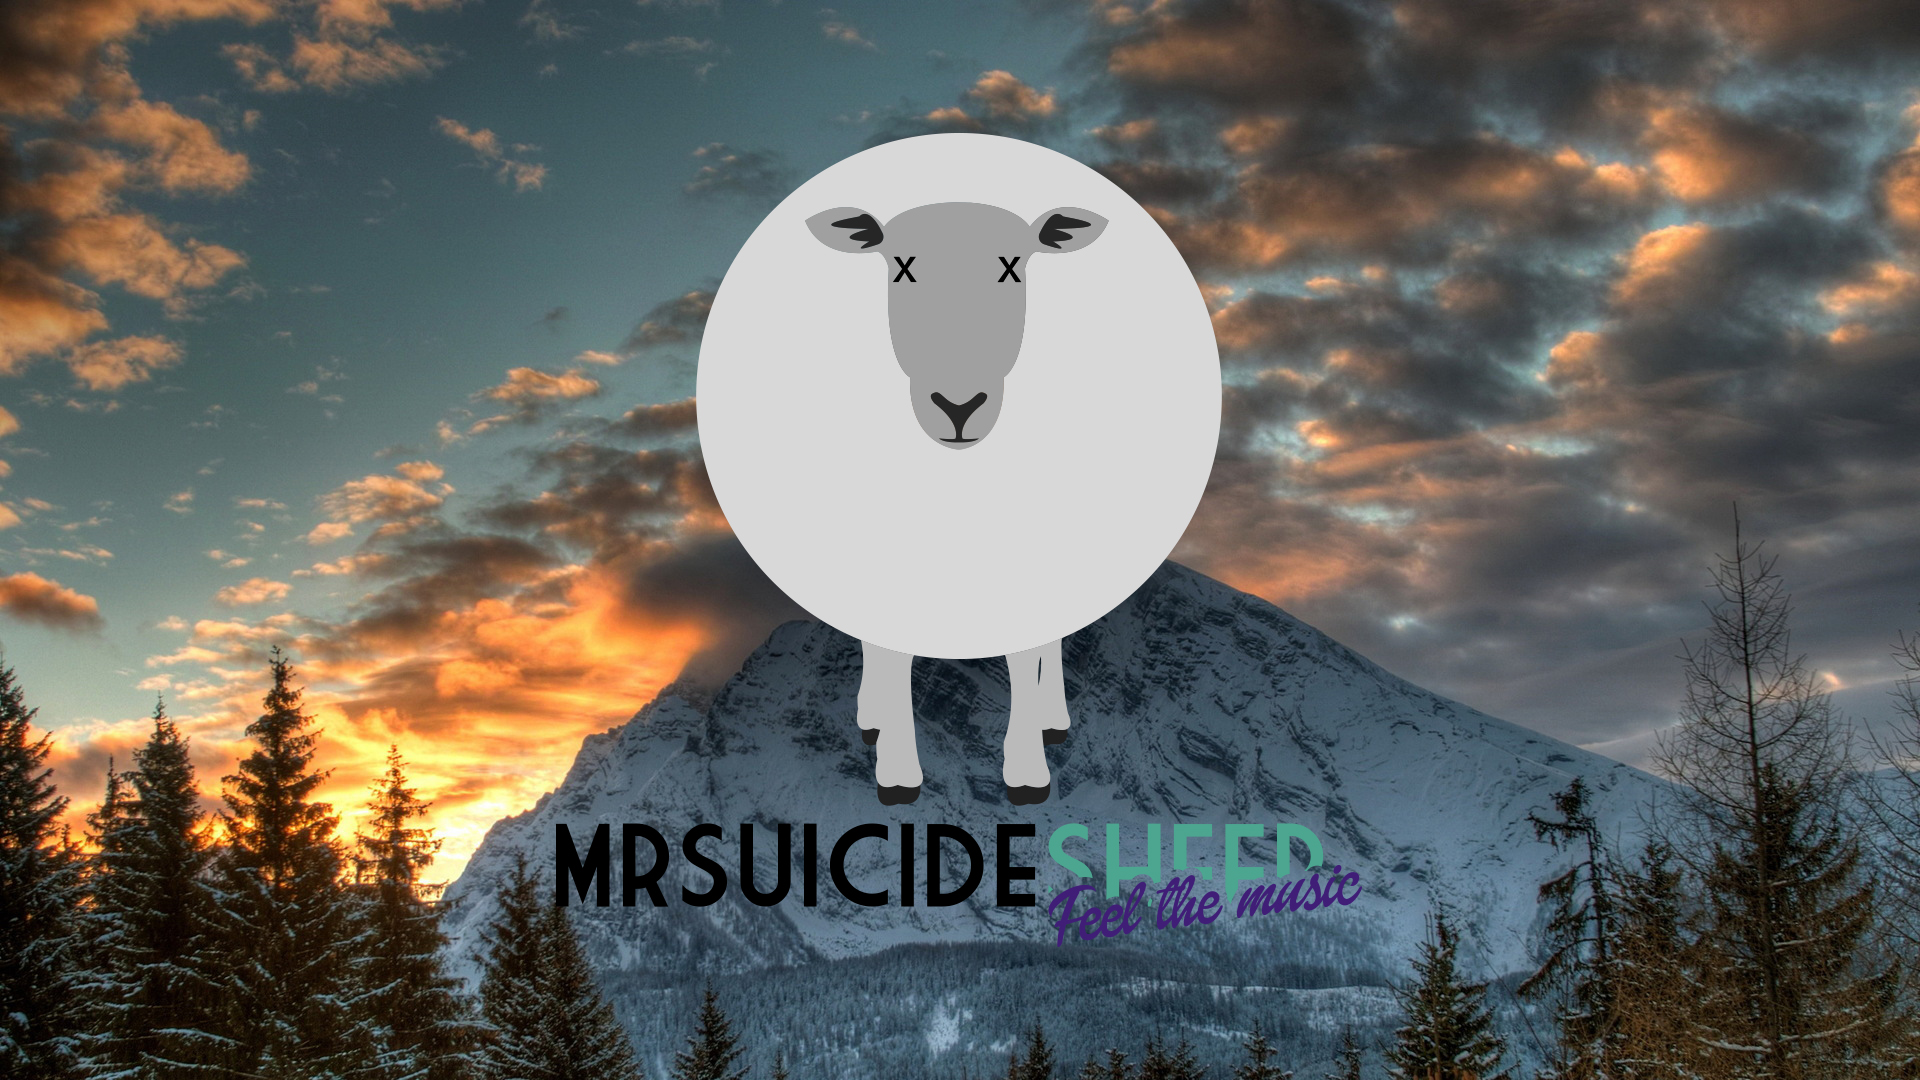 Mr suicide Sheep Feel the music by TheTobbs on DeviantArt